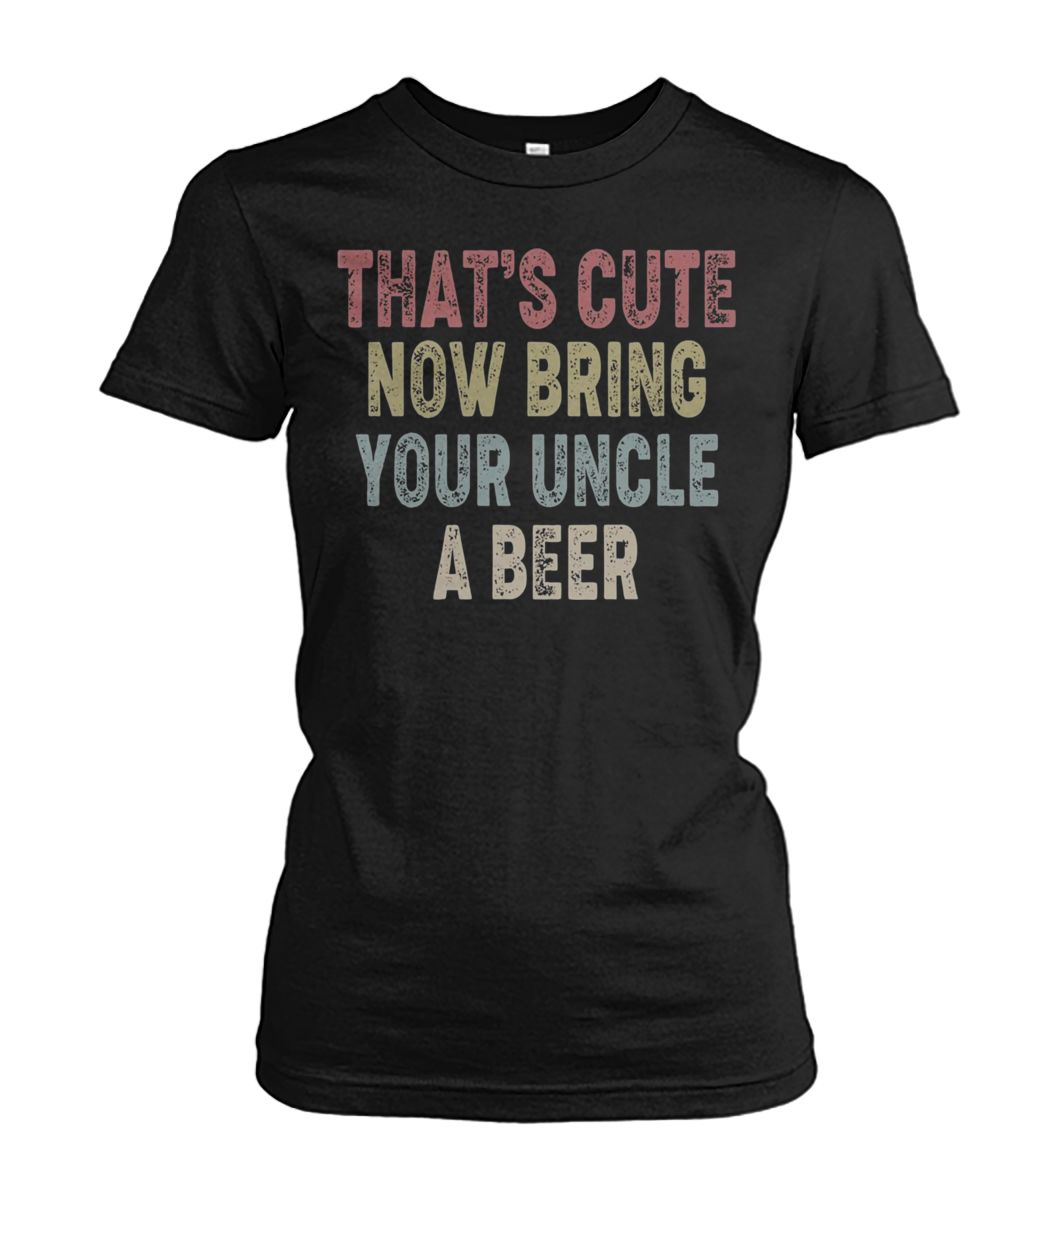 Vintage that's cute now bring your uncle a beer women's crew tee